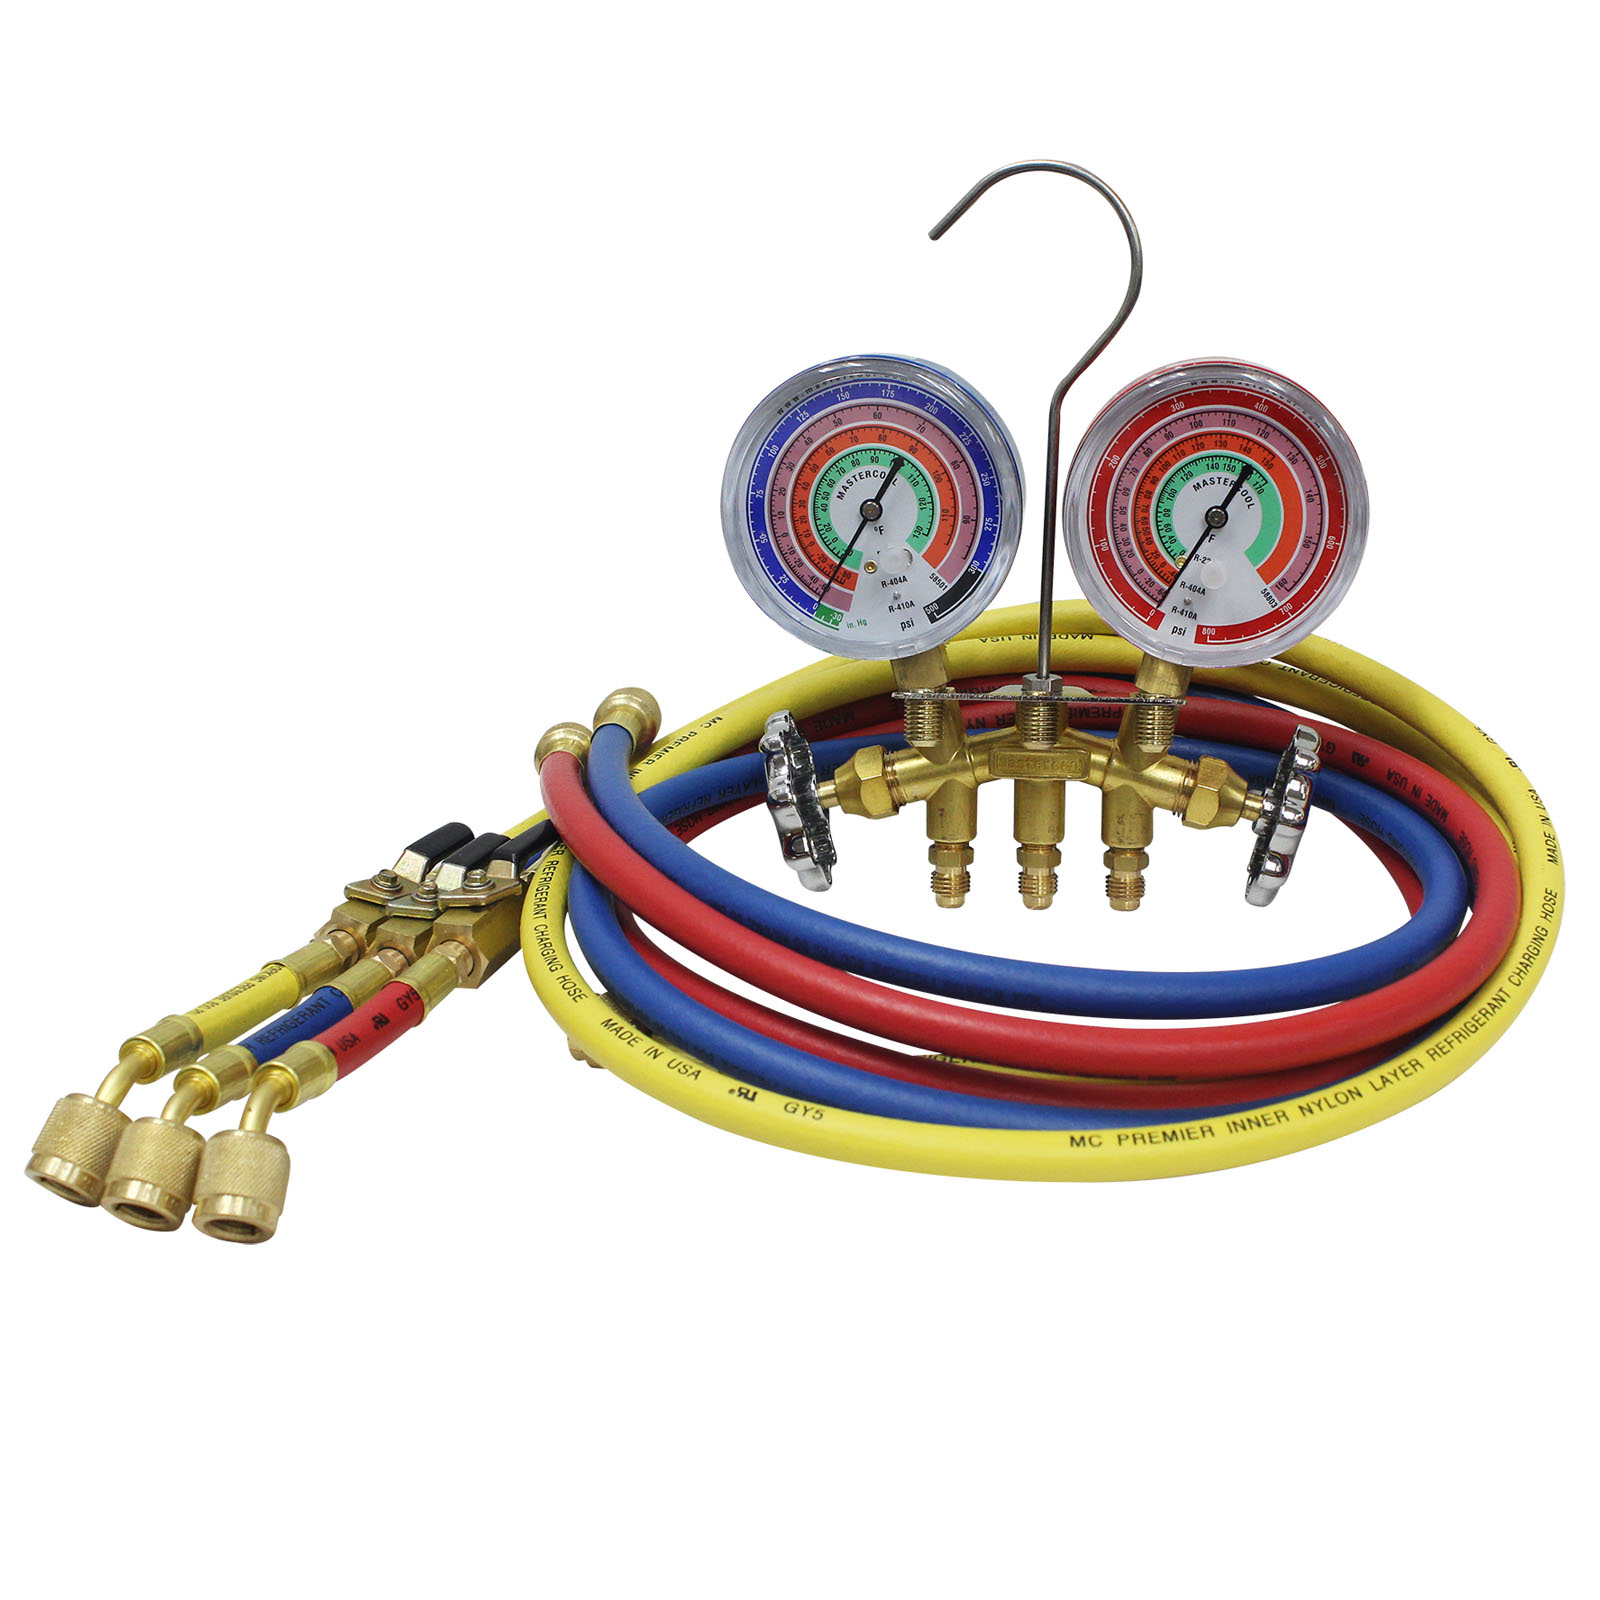 R22 Details about   Mastercool 59161 Brass R410A R404A 2-Way Manifold Gauge Set with 3-1/8 and 